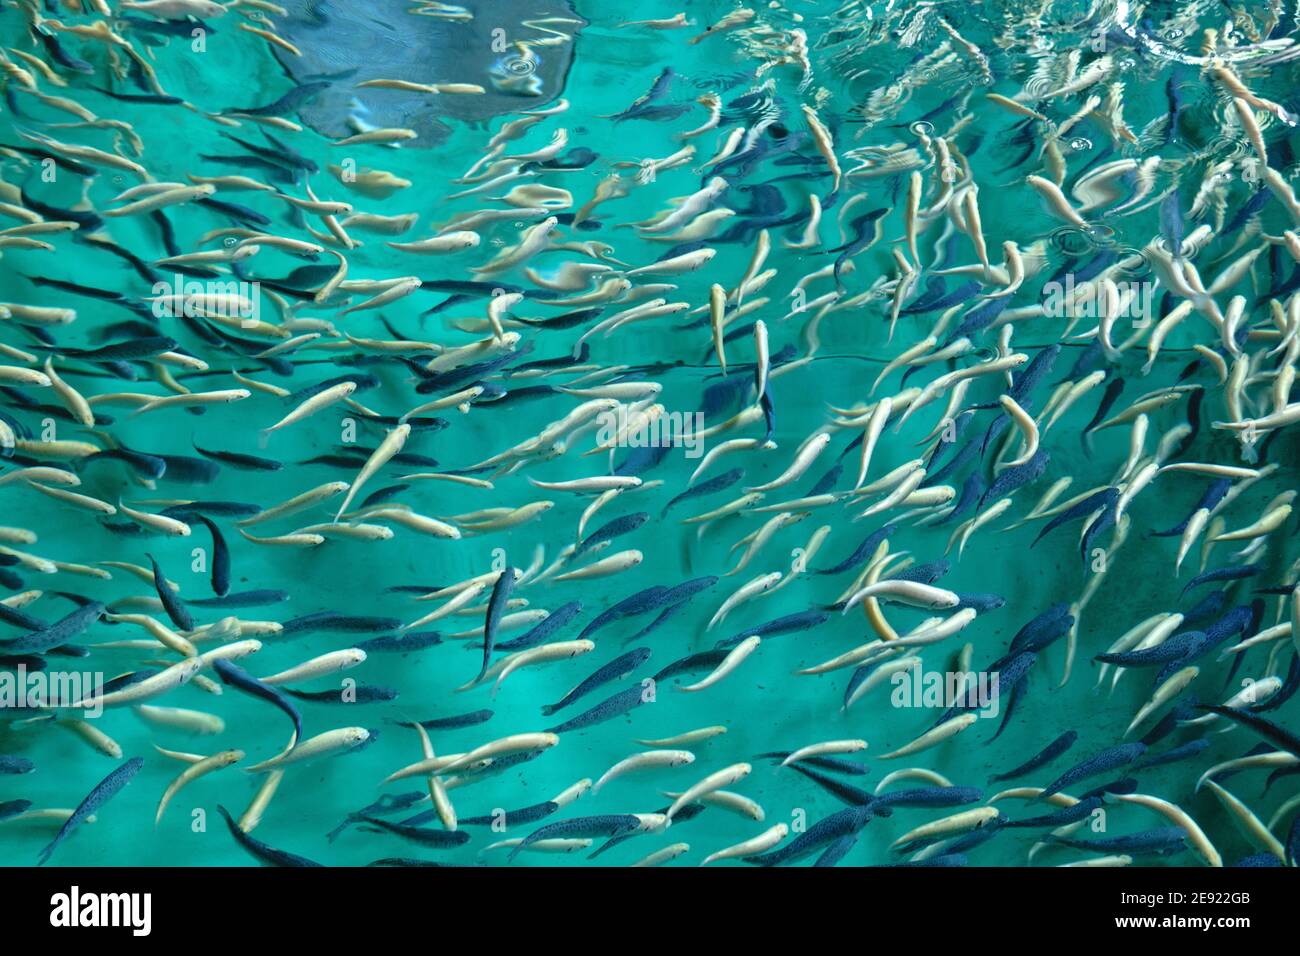 flock fish in a trout farm. Breeding trout for the food industry. Trout farming, fishing, freshwater fish farming. Stock Photo